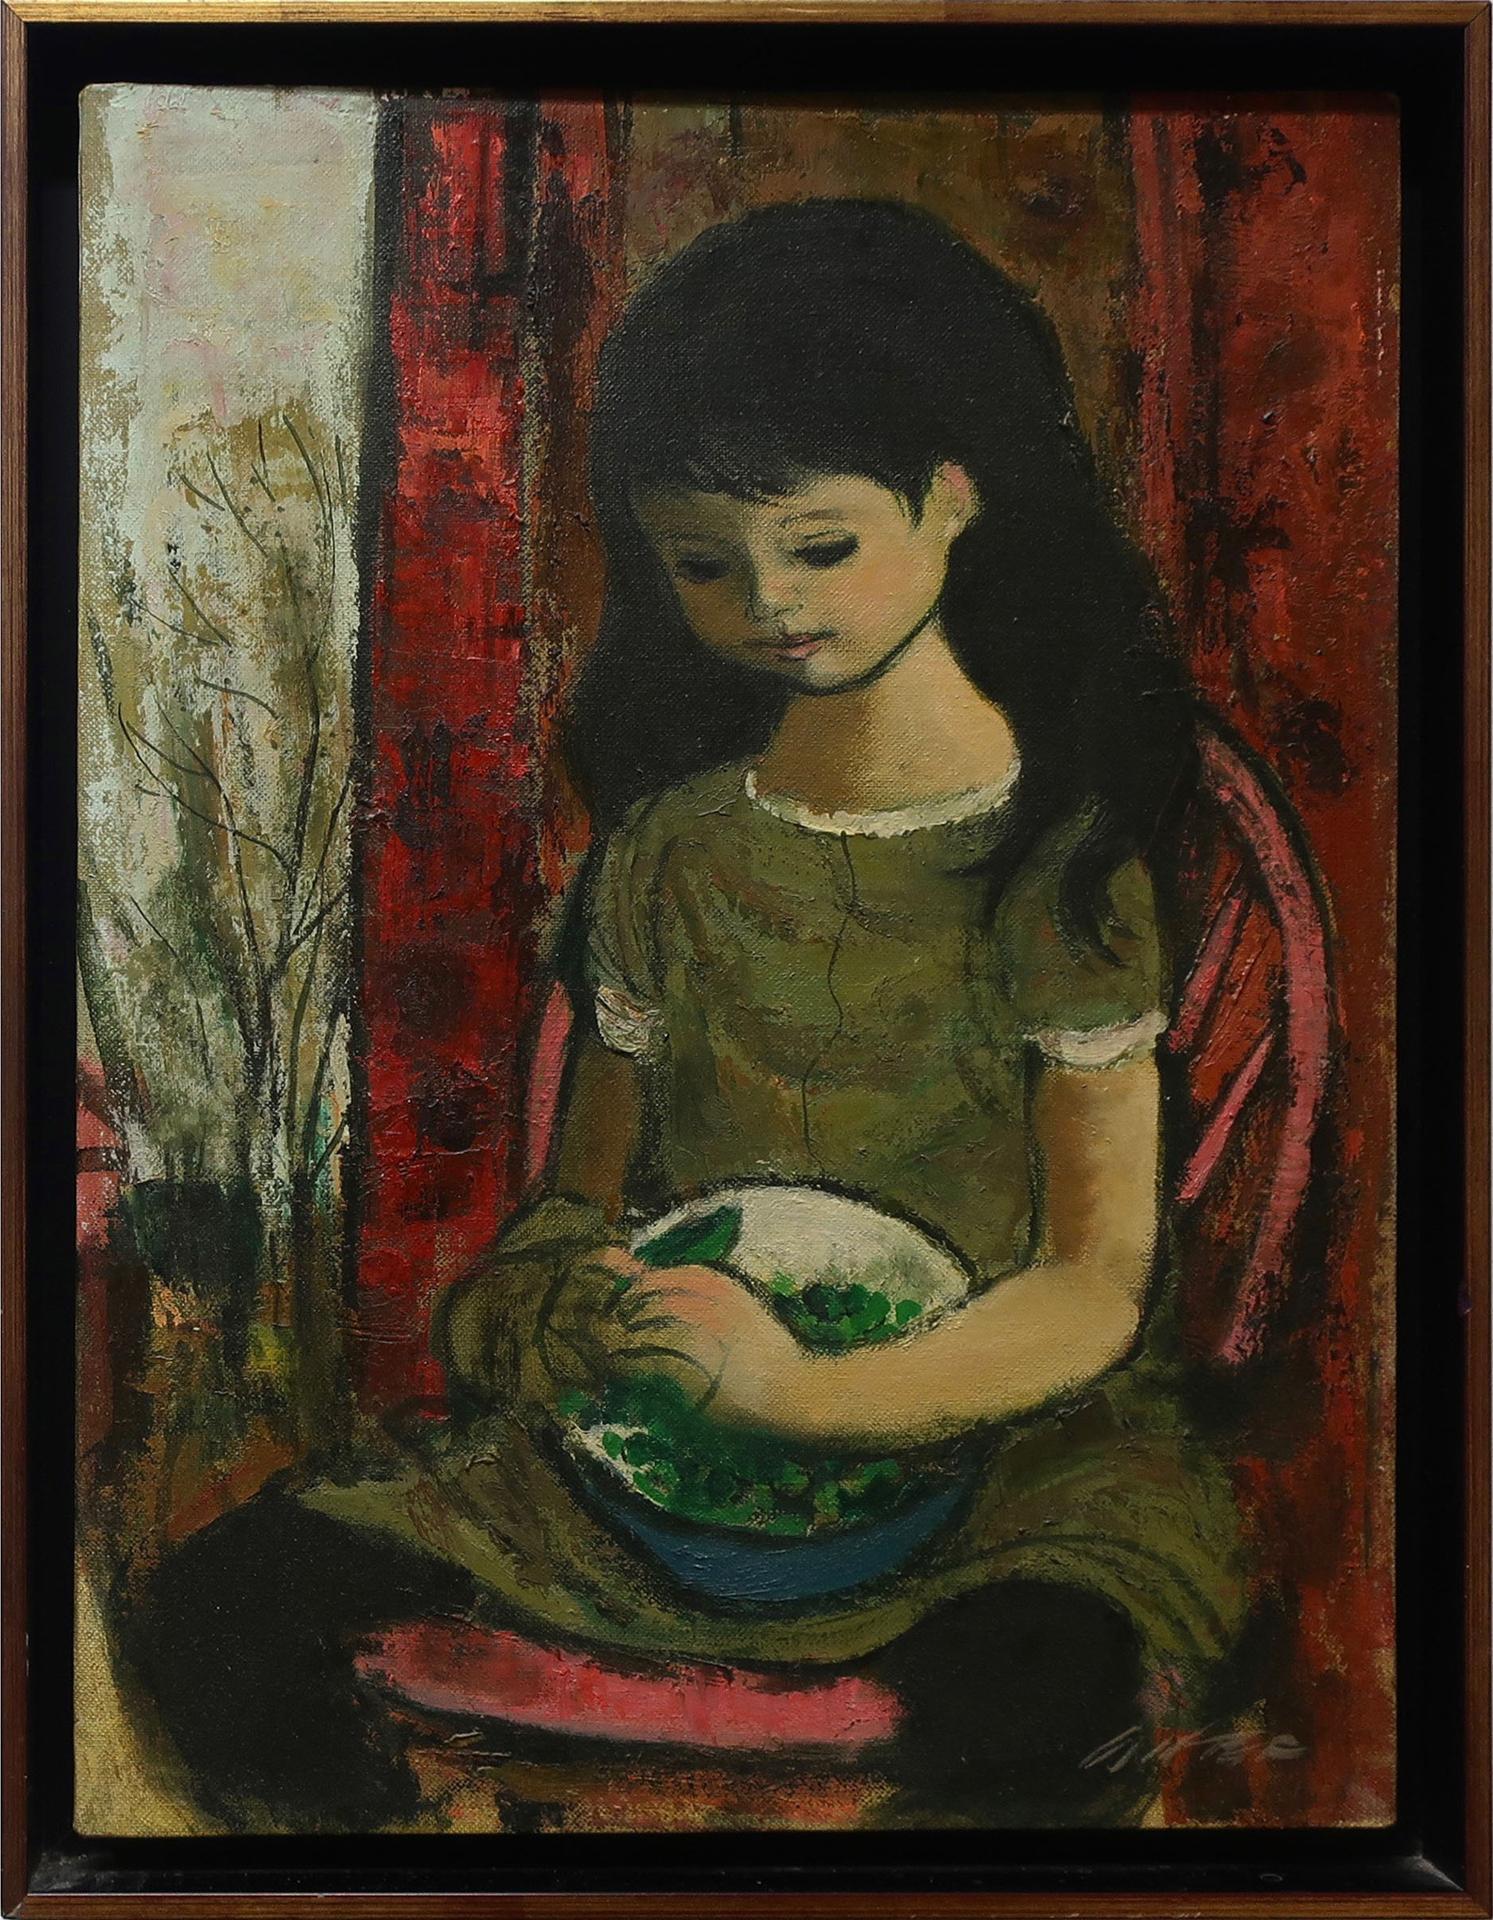 William Arthur Winter (1909-1996) - Untitled (Young Girl Shucking Peas)